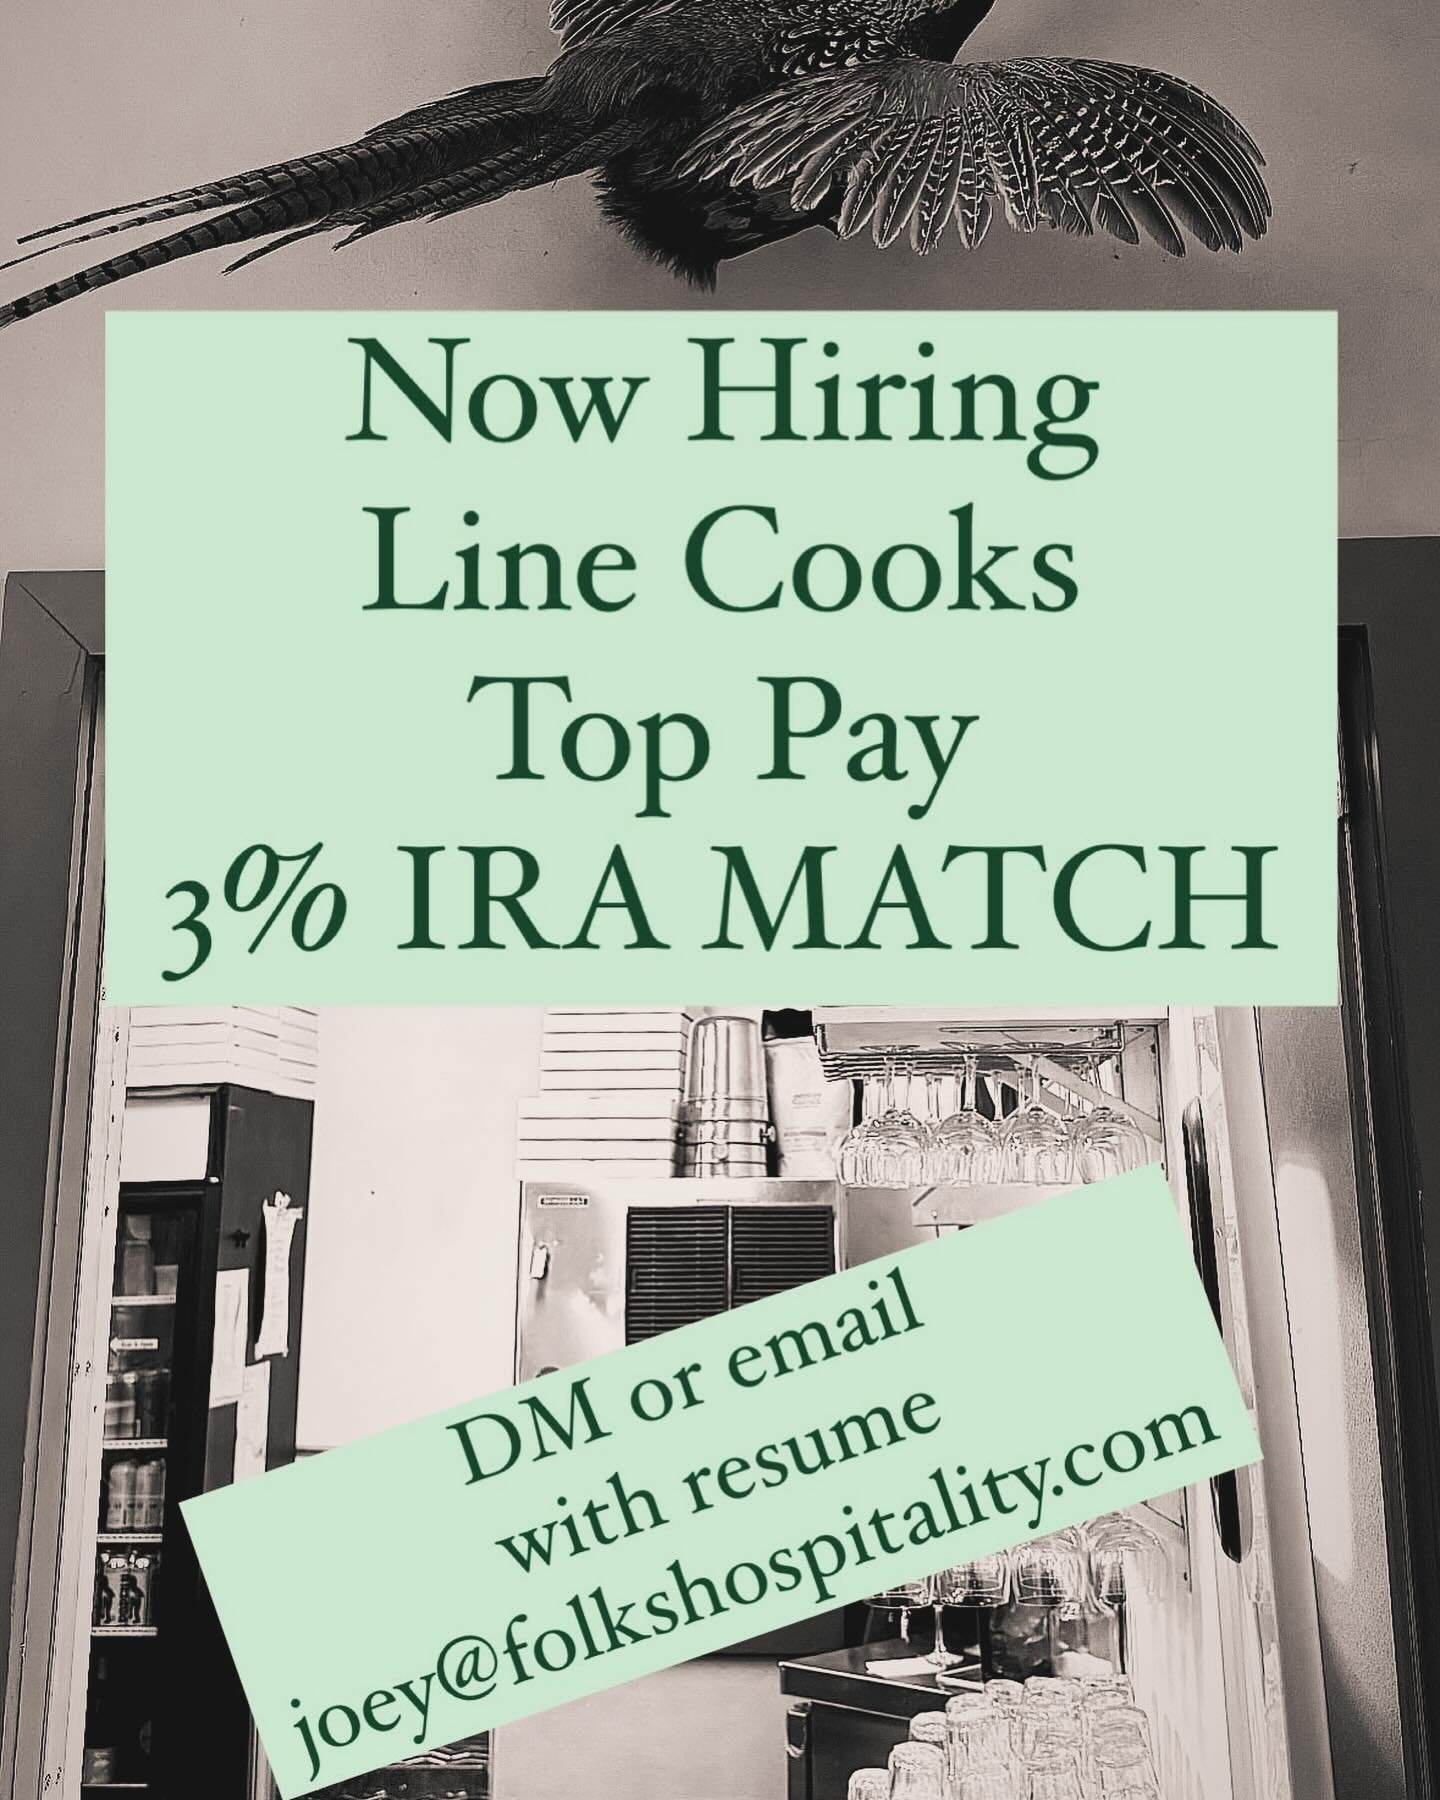 ‼️ NOW HIRING IN THE KITCHEN
Please your resume over and get a call back from our chef/owner Joey.